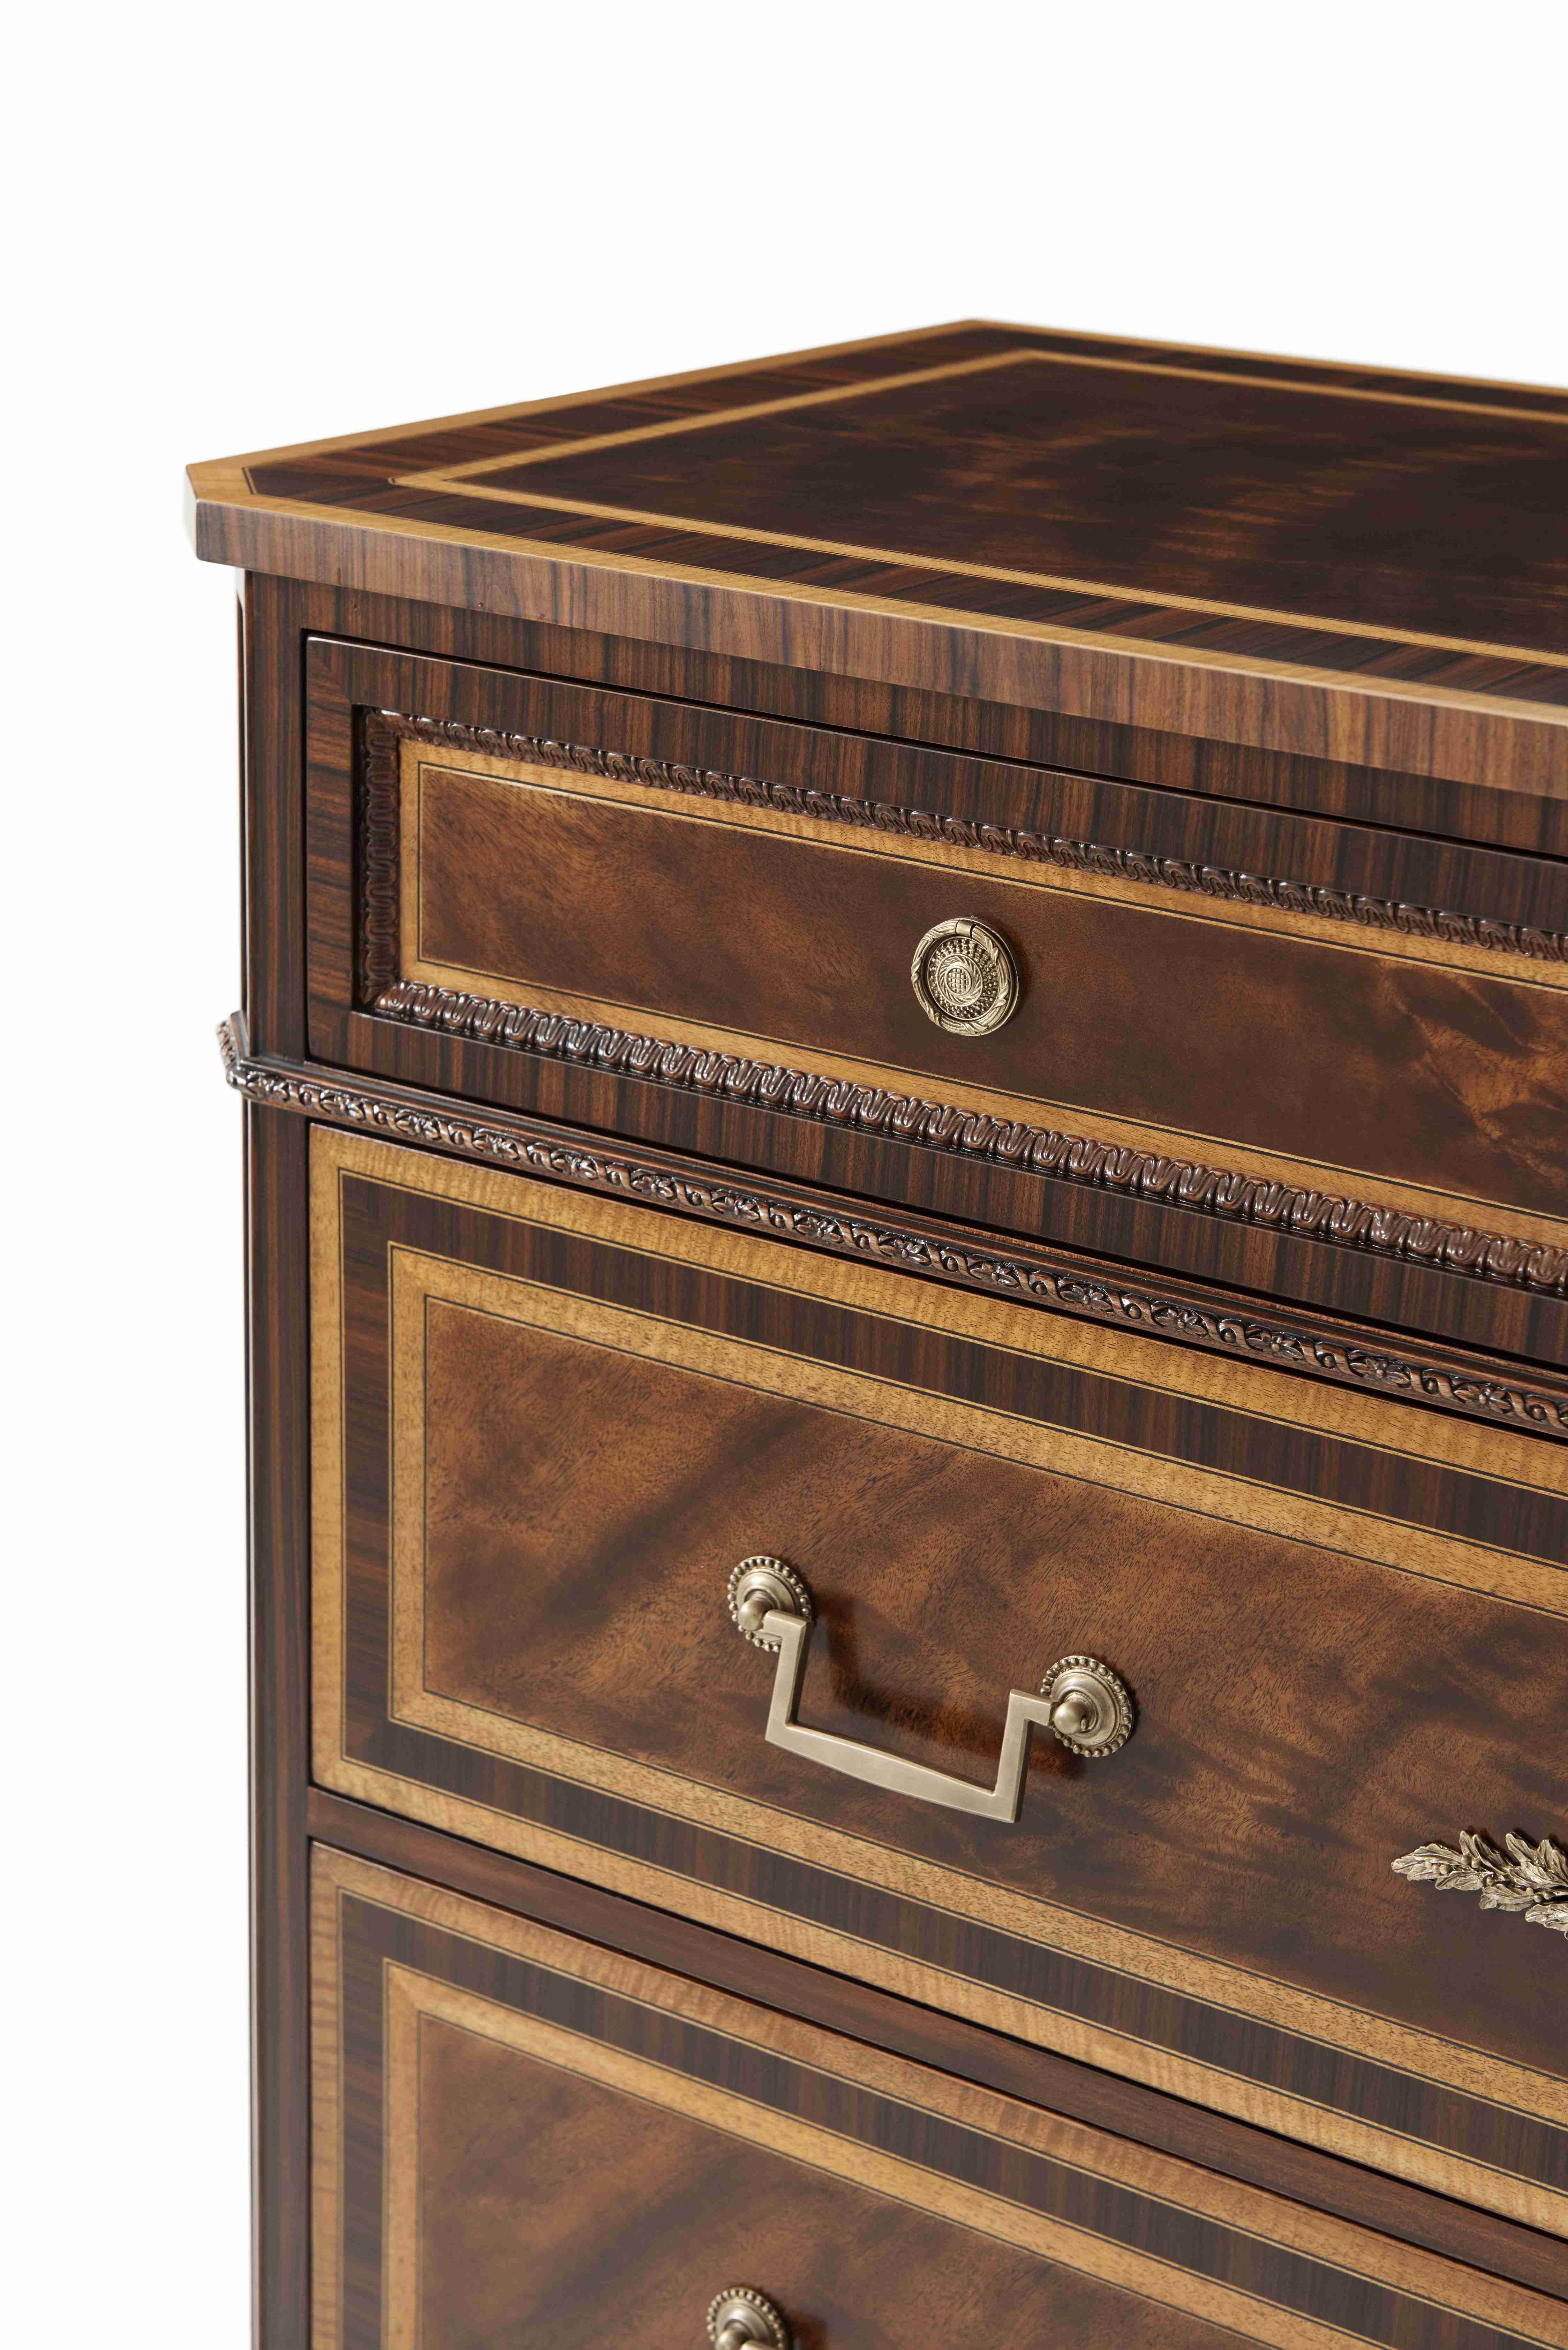 VISCOUNT'S CHEST OF DRAWERS